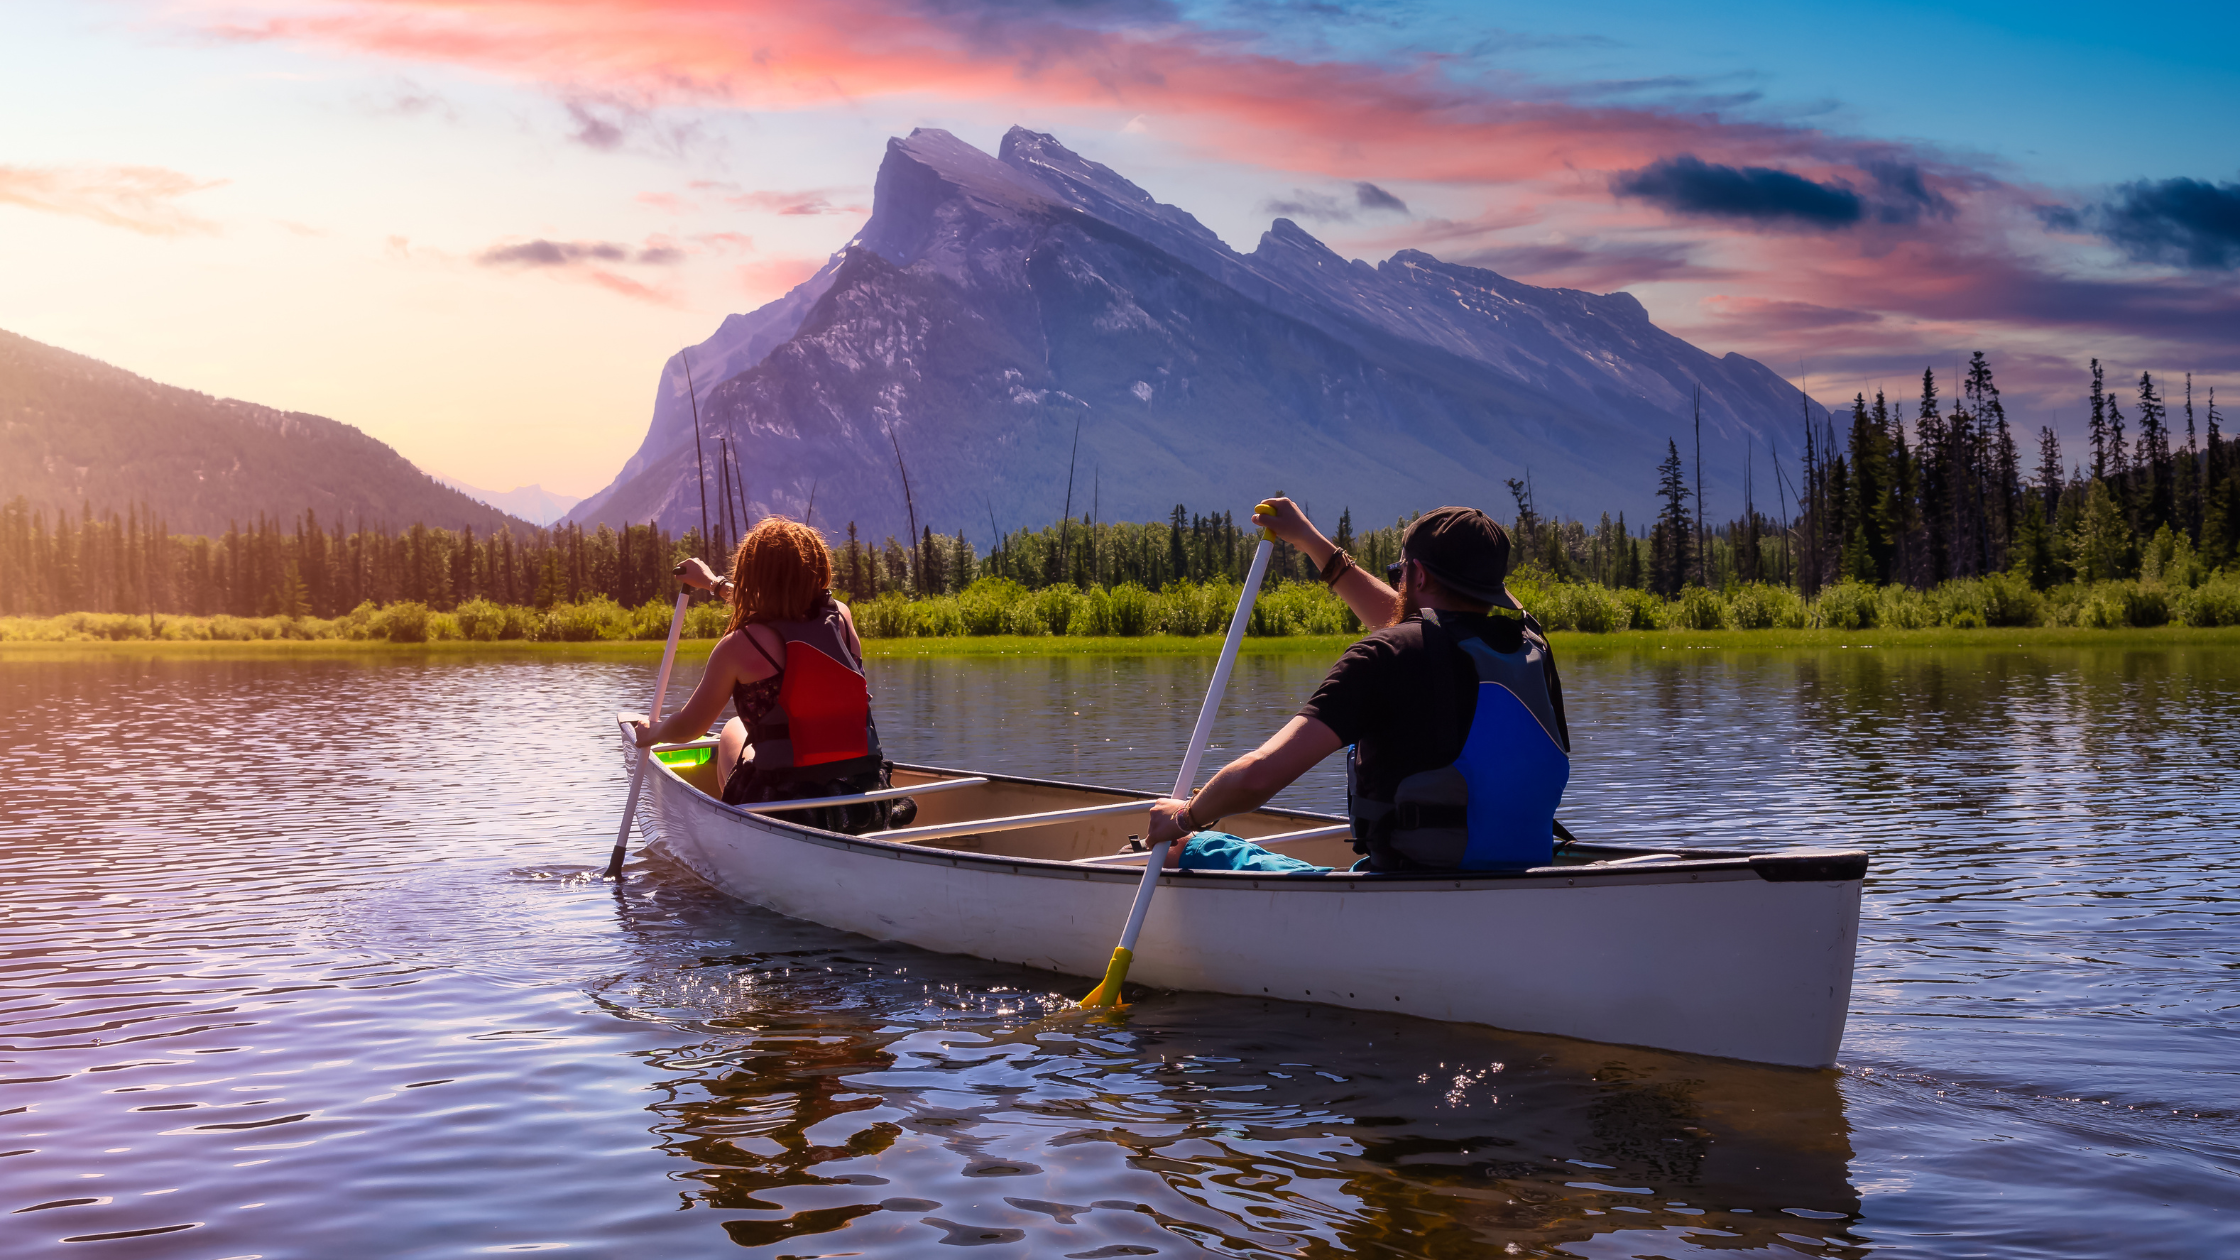 Man and woman rowing a canoe on a lake with sunset and mountains in the background